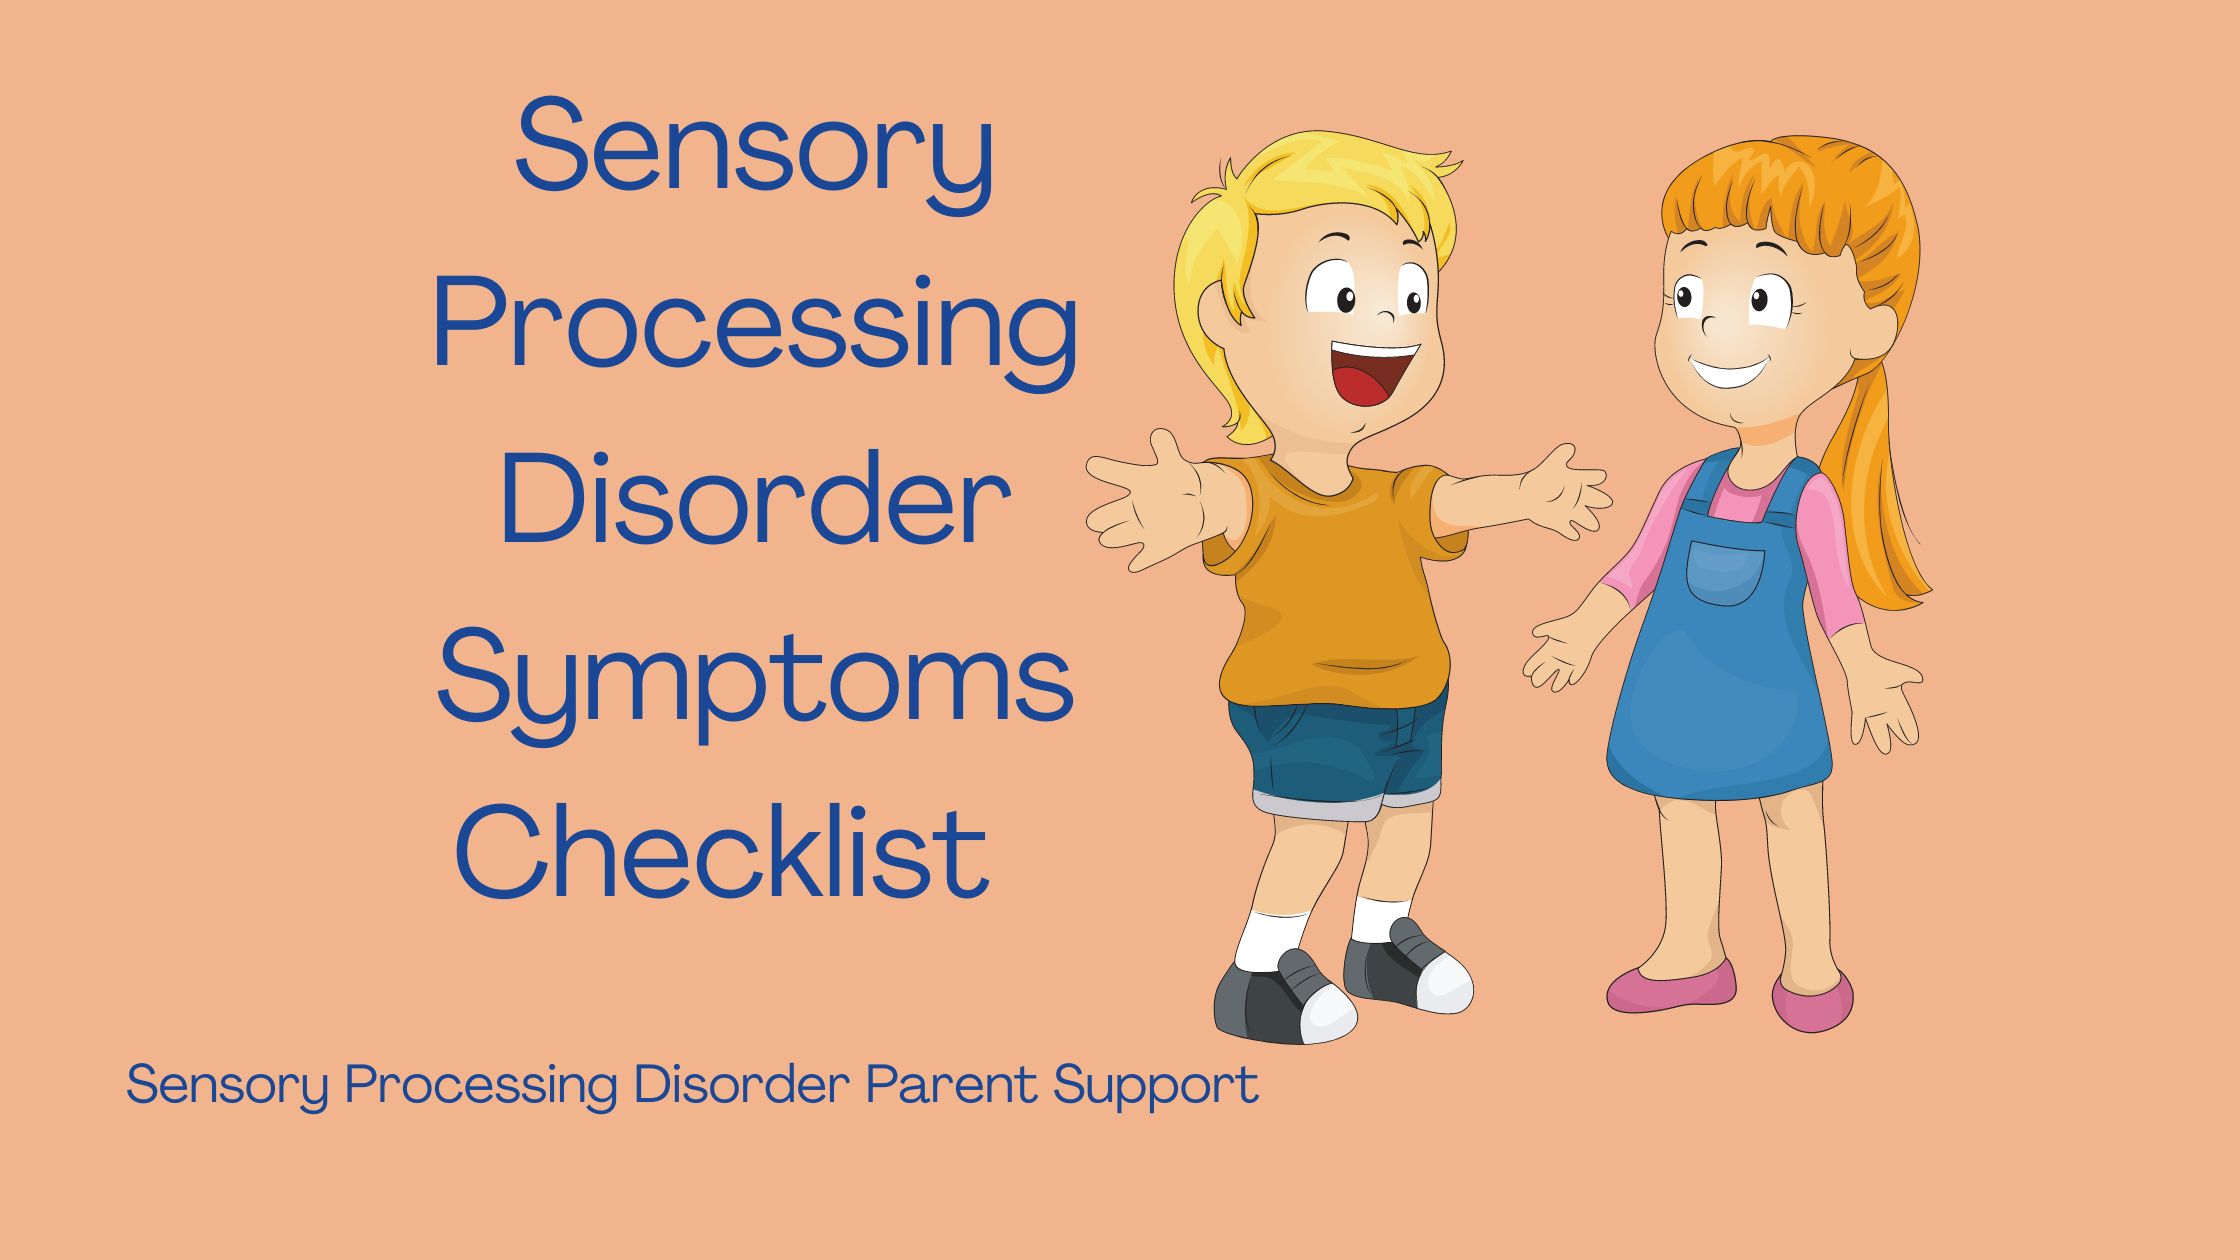 A boy and a girl who have senspry processing disorder says sensory processing symptoms checklist sensory checklist sensory processing disorder symptoms checklist